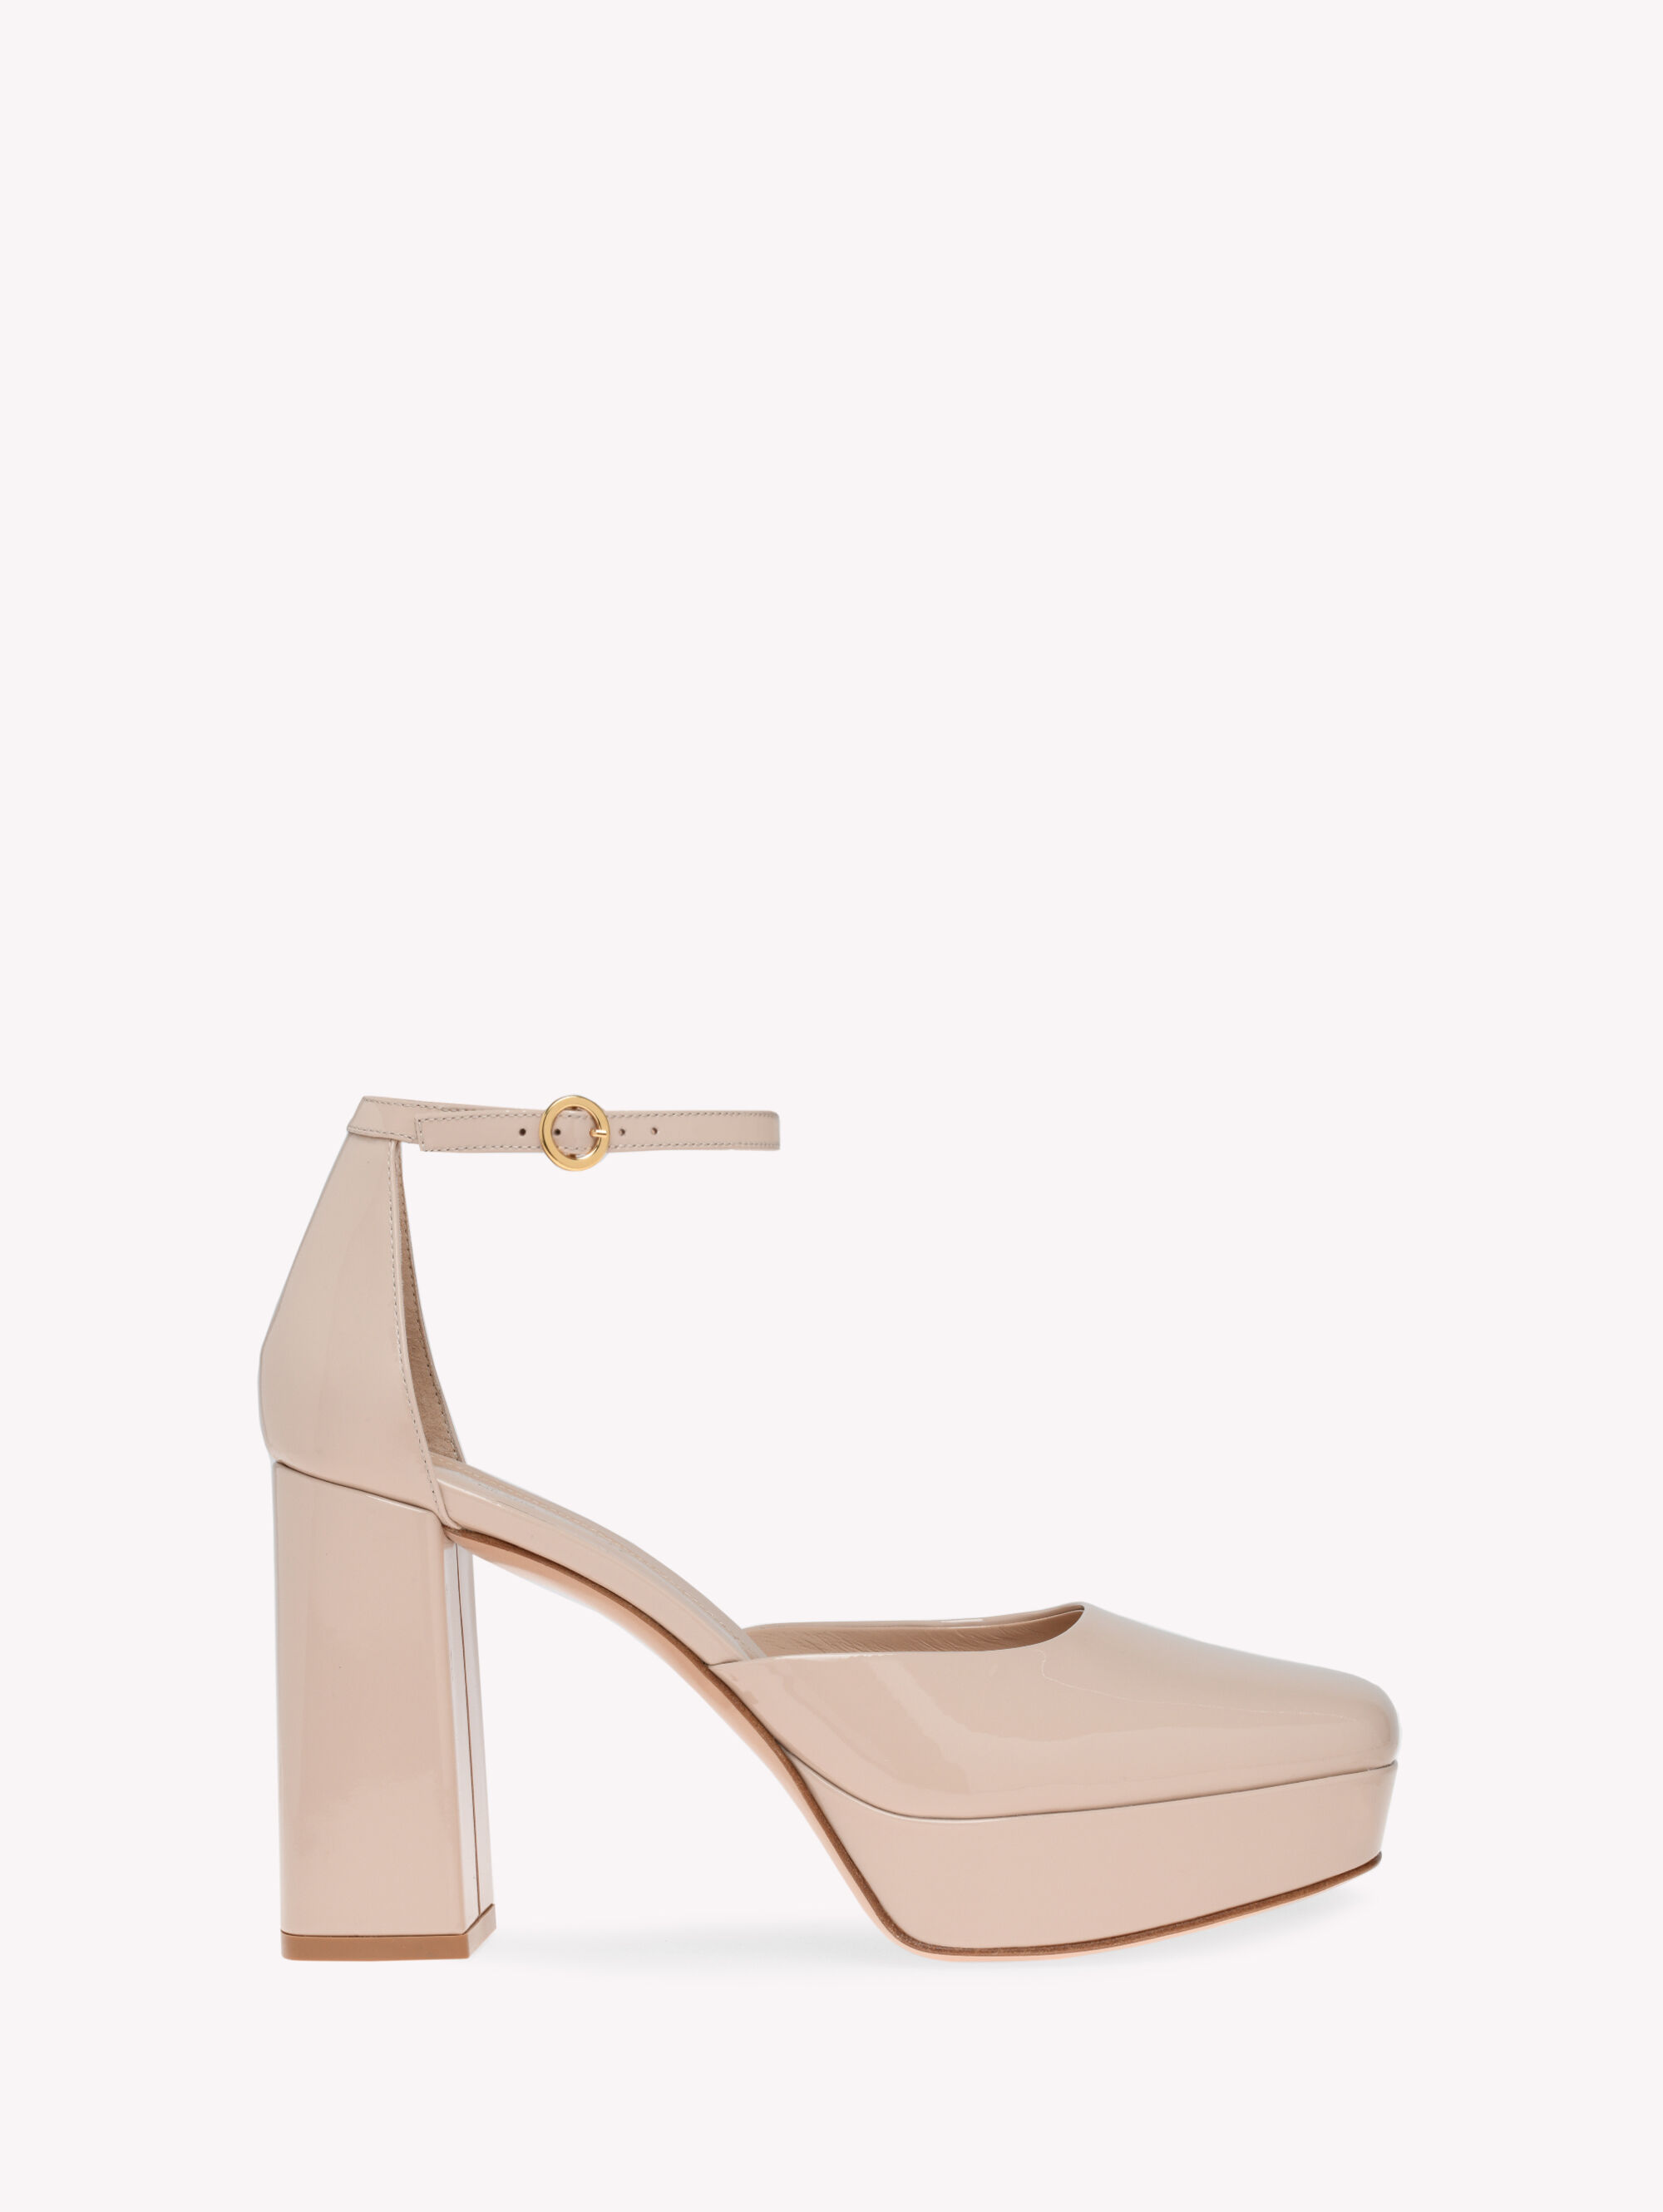 Women's New Arrivals: Luxury Shoes and Bags | Gianvito Rossi